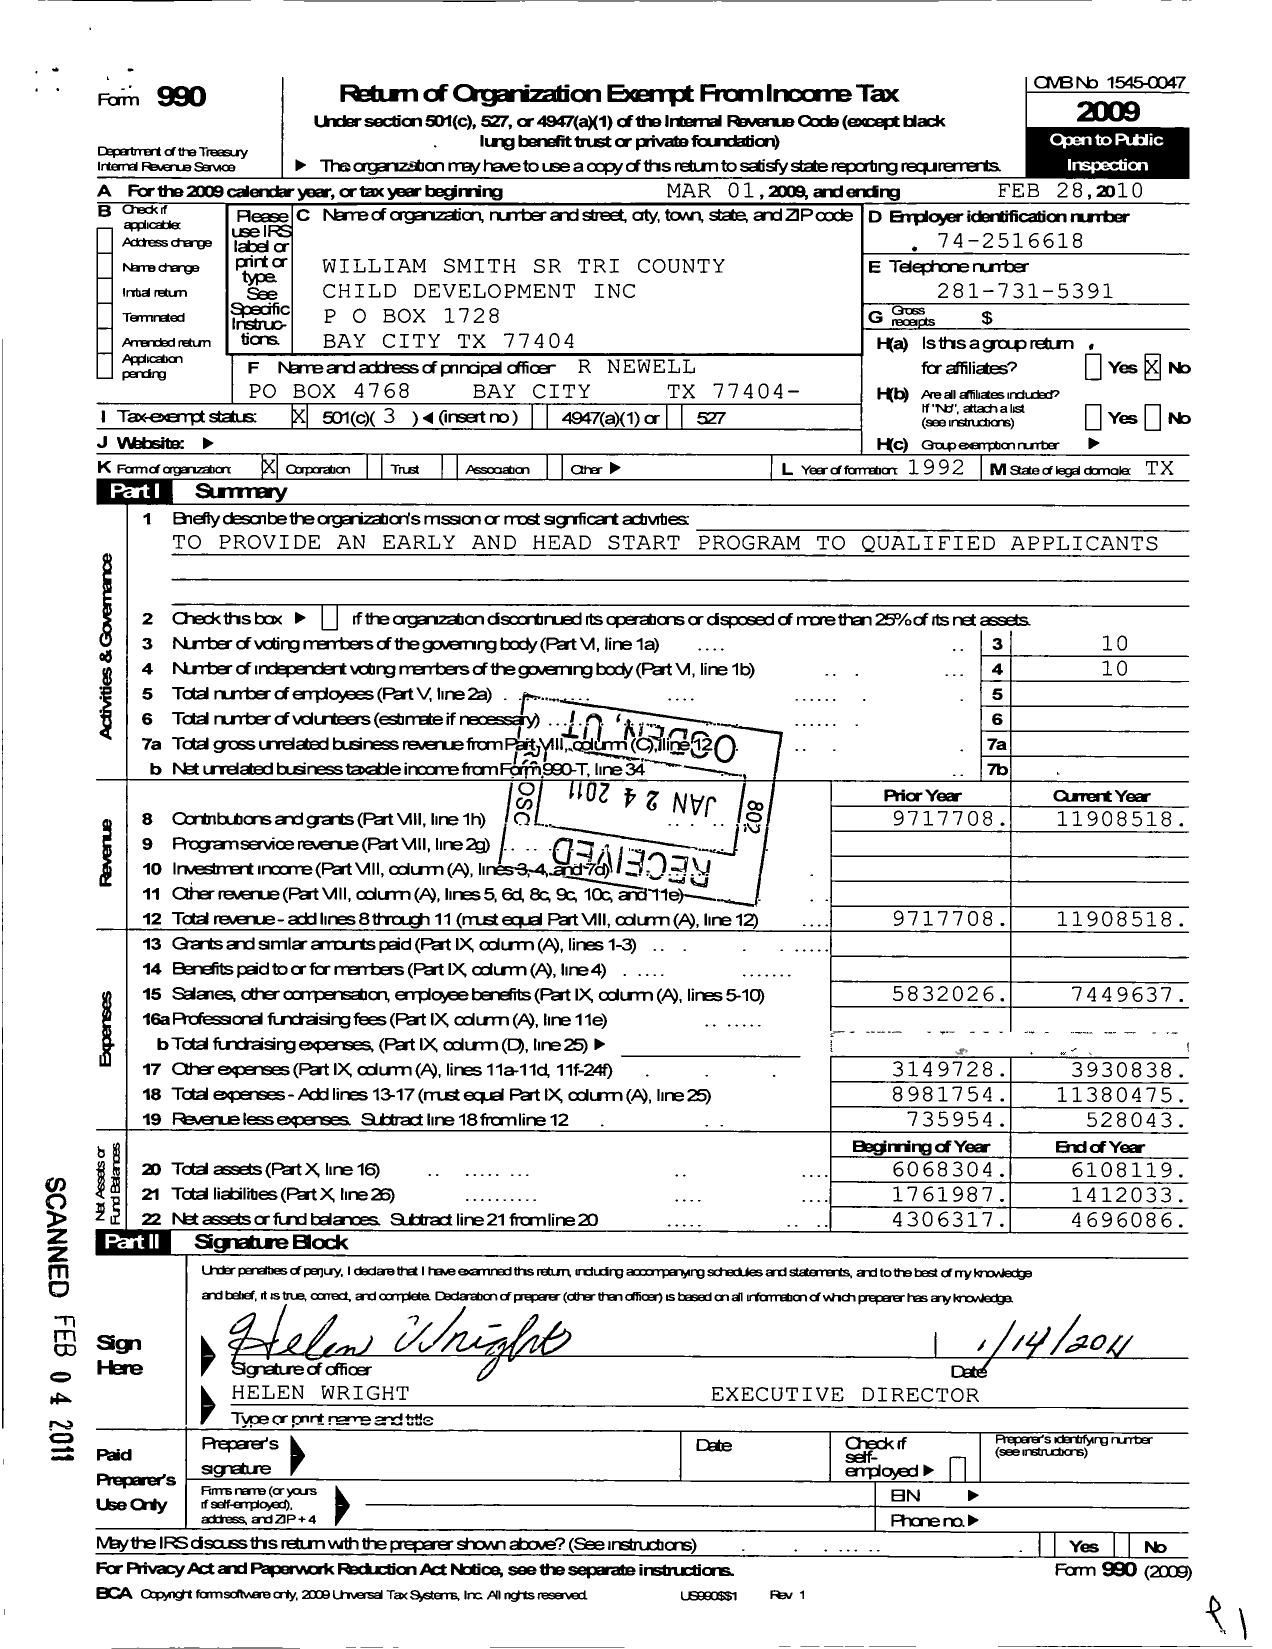 Image of first page of 2009 Form 990 for William Smith Sr Tri County Child Development Council